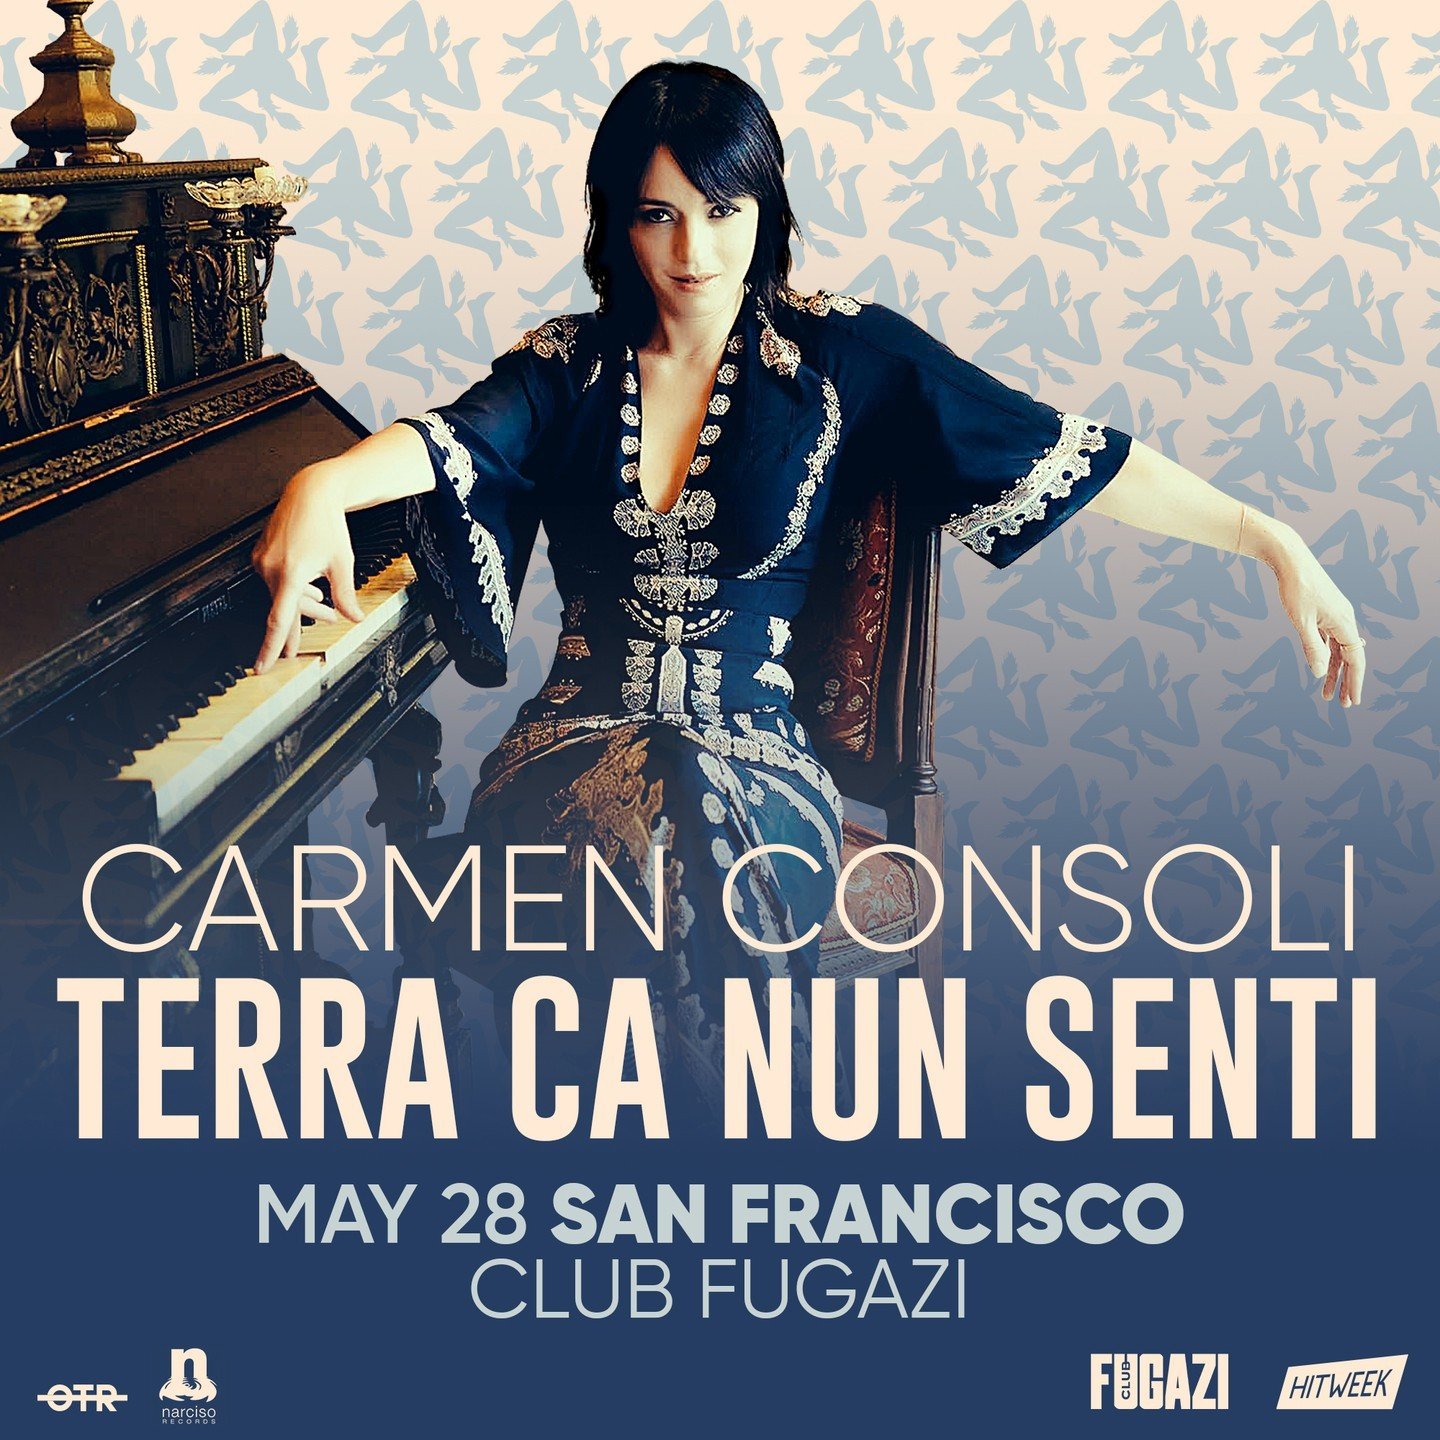 Carmen Consoli will be gracing our theater stage - Club Fugazi - on Tuesday, May 28th for an unforgettable performance! 🎤🎸
Secure your tickets now at https://tickets.clubfugazisf.com/tickets/series/CarmenConsoli/ and don't miss out on this incredib